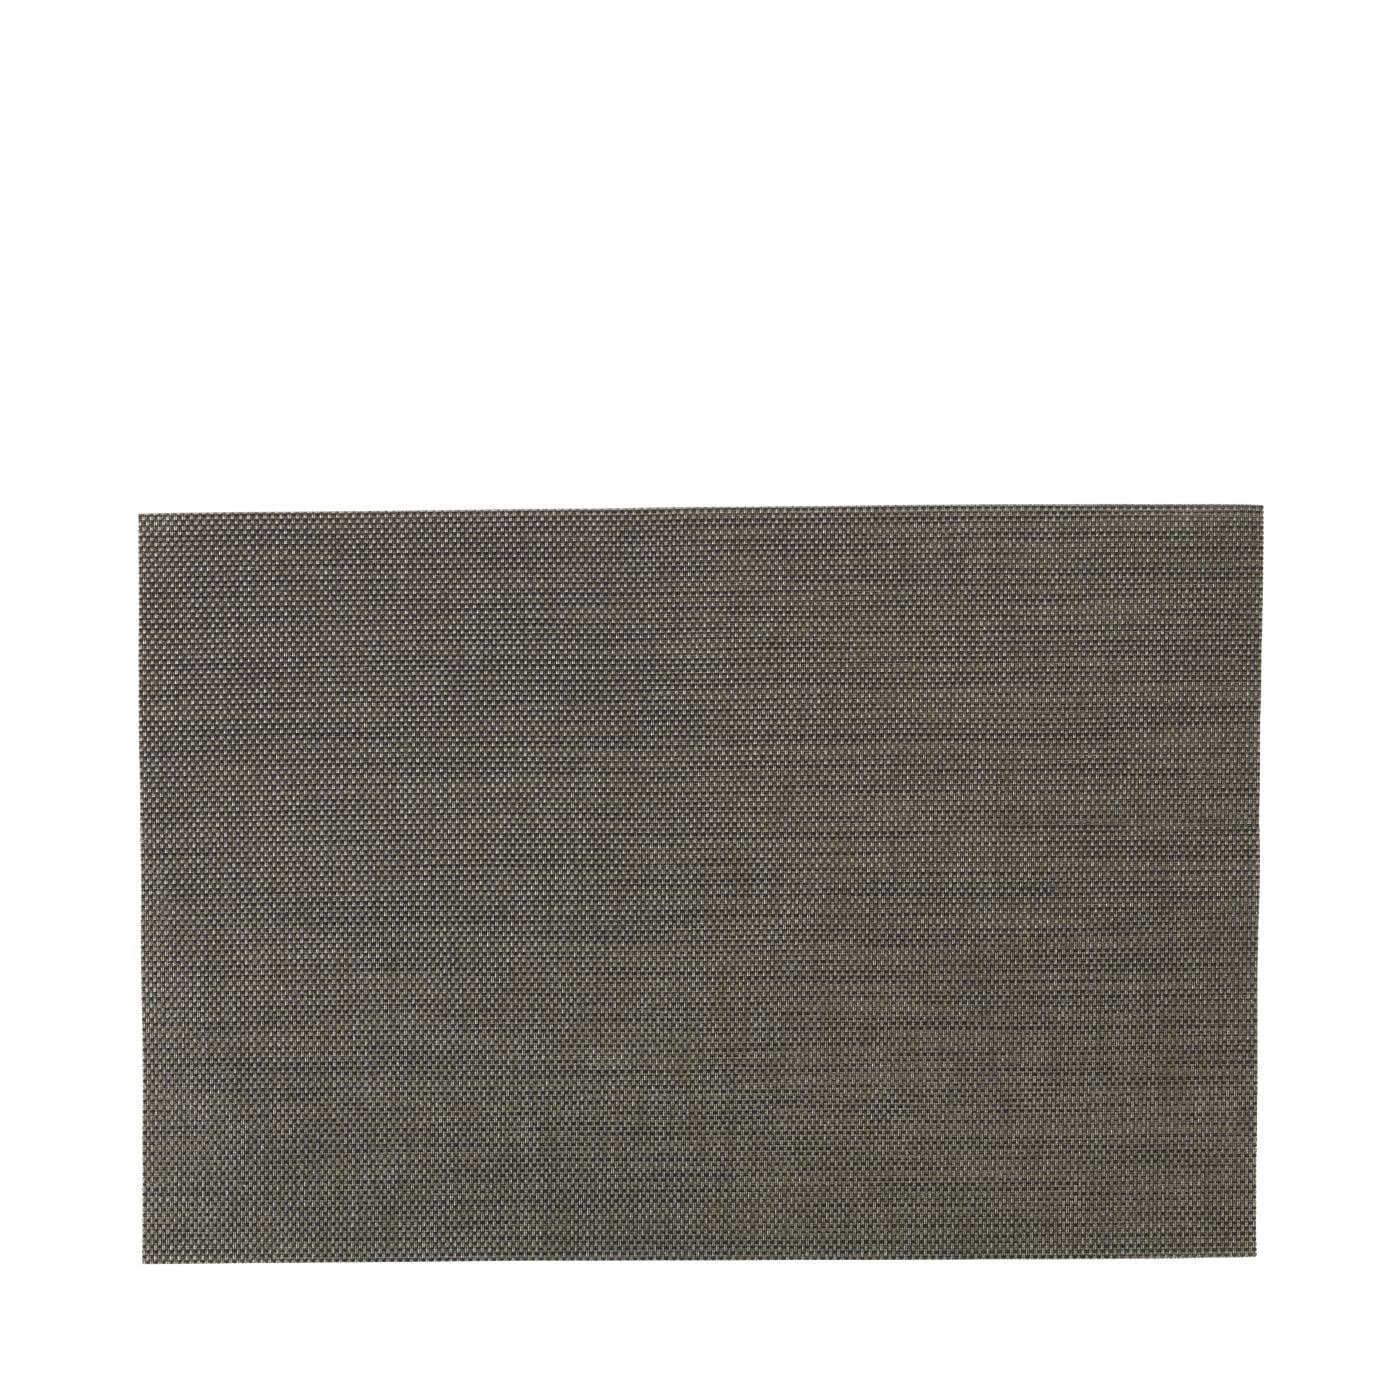 SITO PLACEMATS - SET OF 4